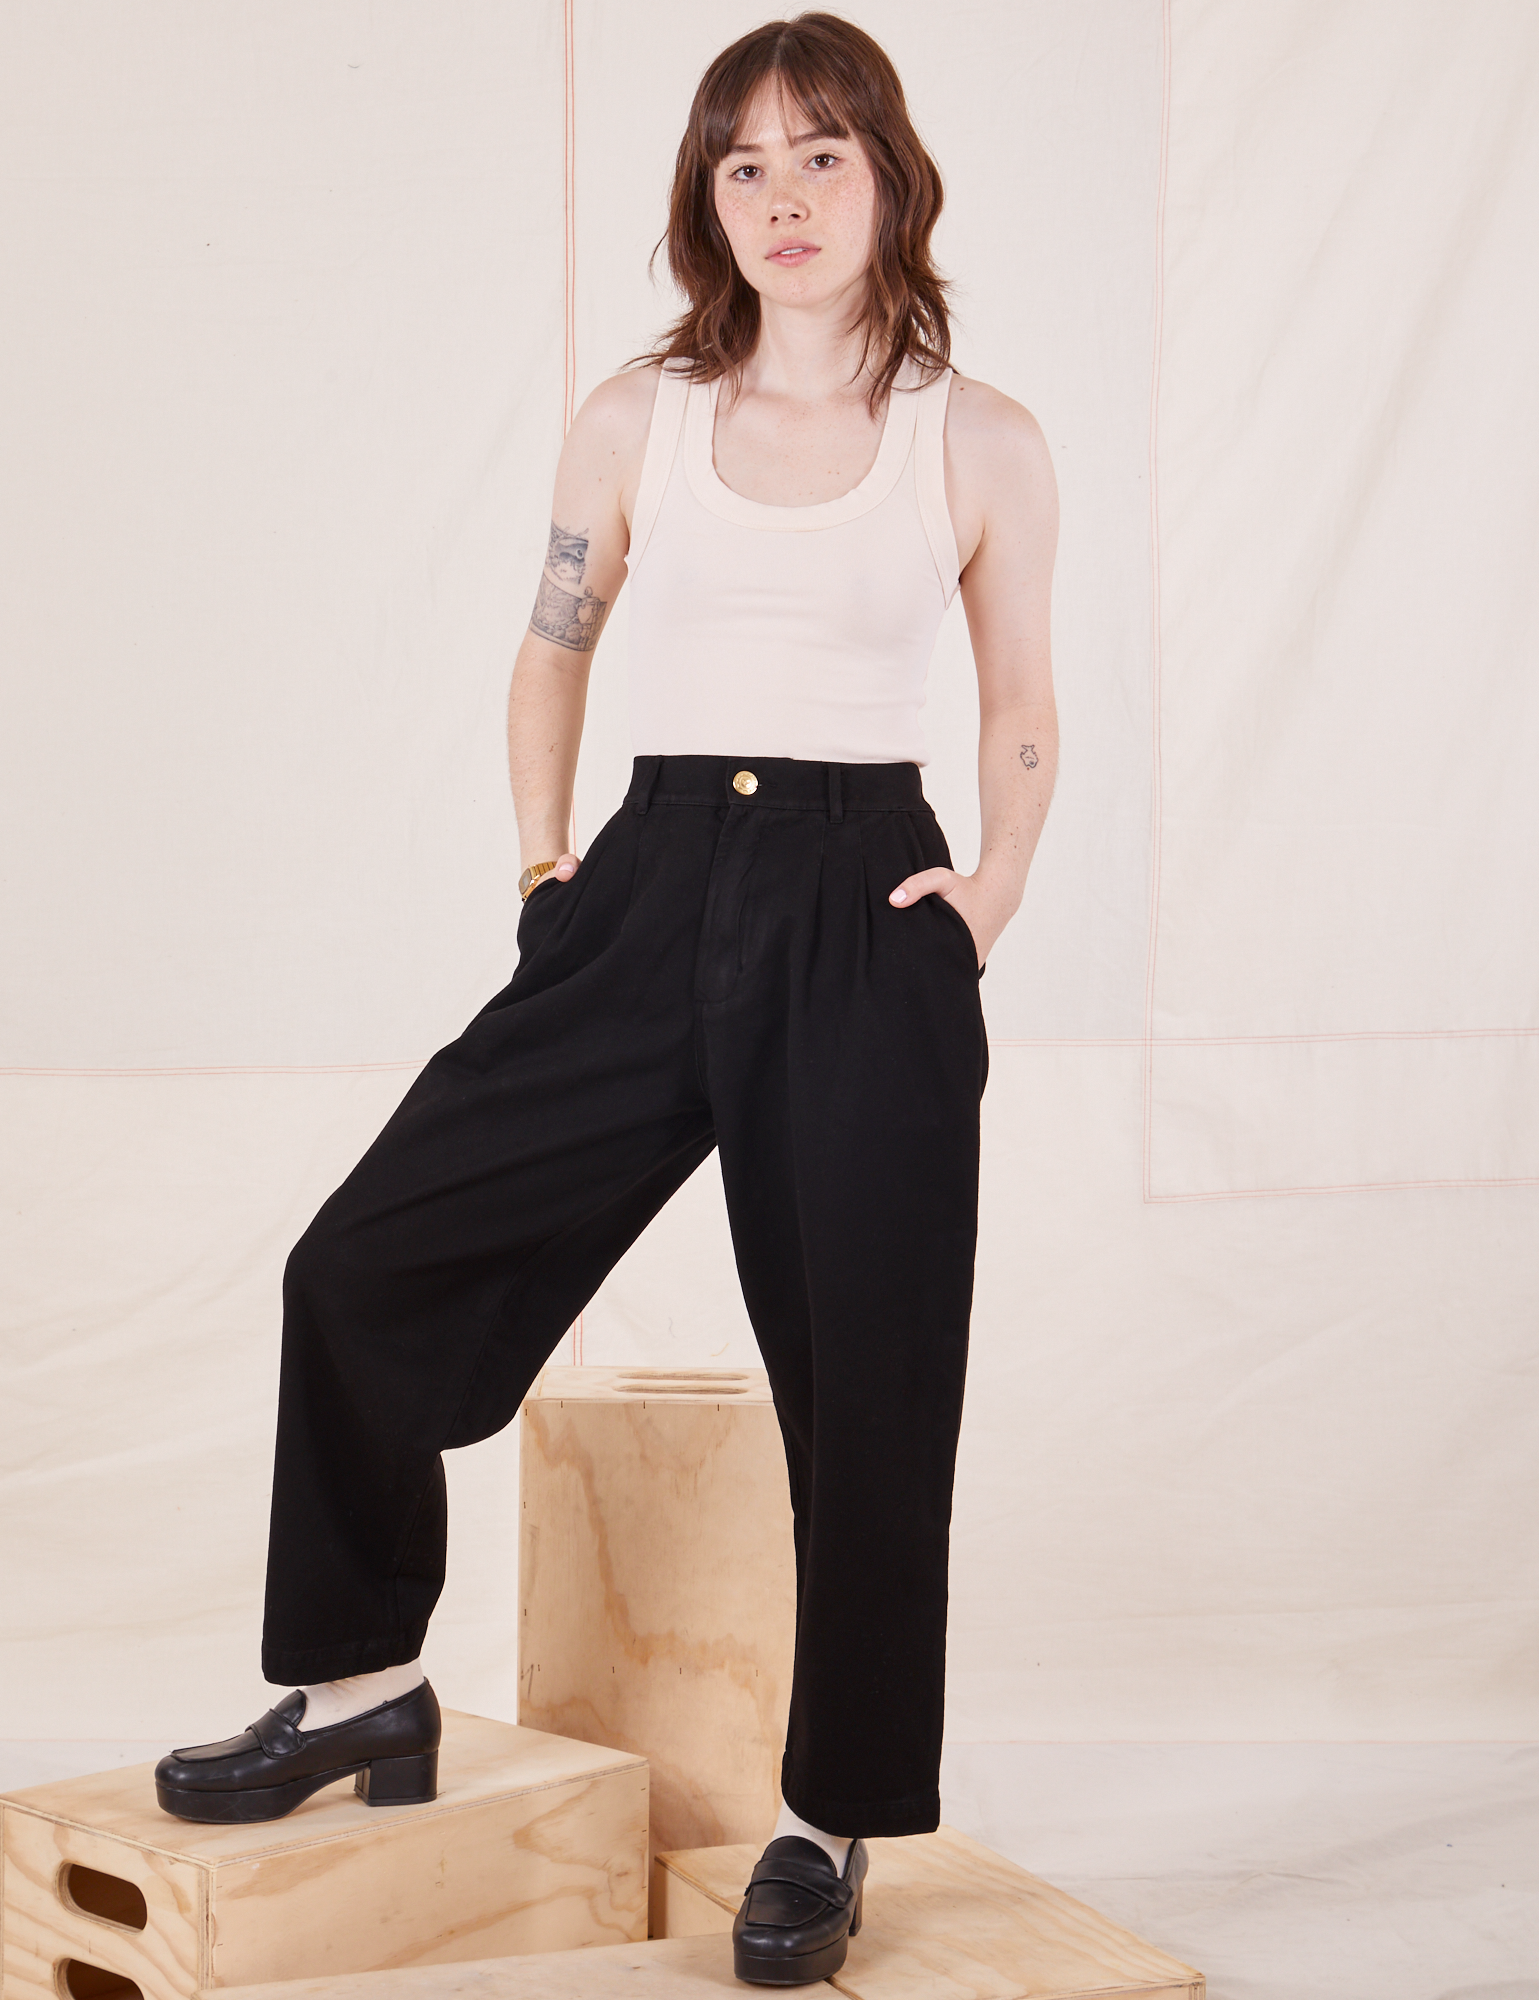 Hana is 5&#39;3&quot; and wearing XXS Petite Organic Trousers in Basic Black paired with Tank Top in vintage tee off-white